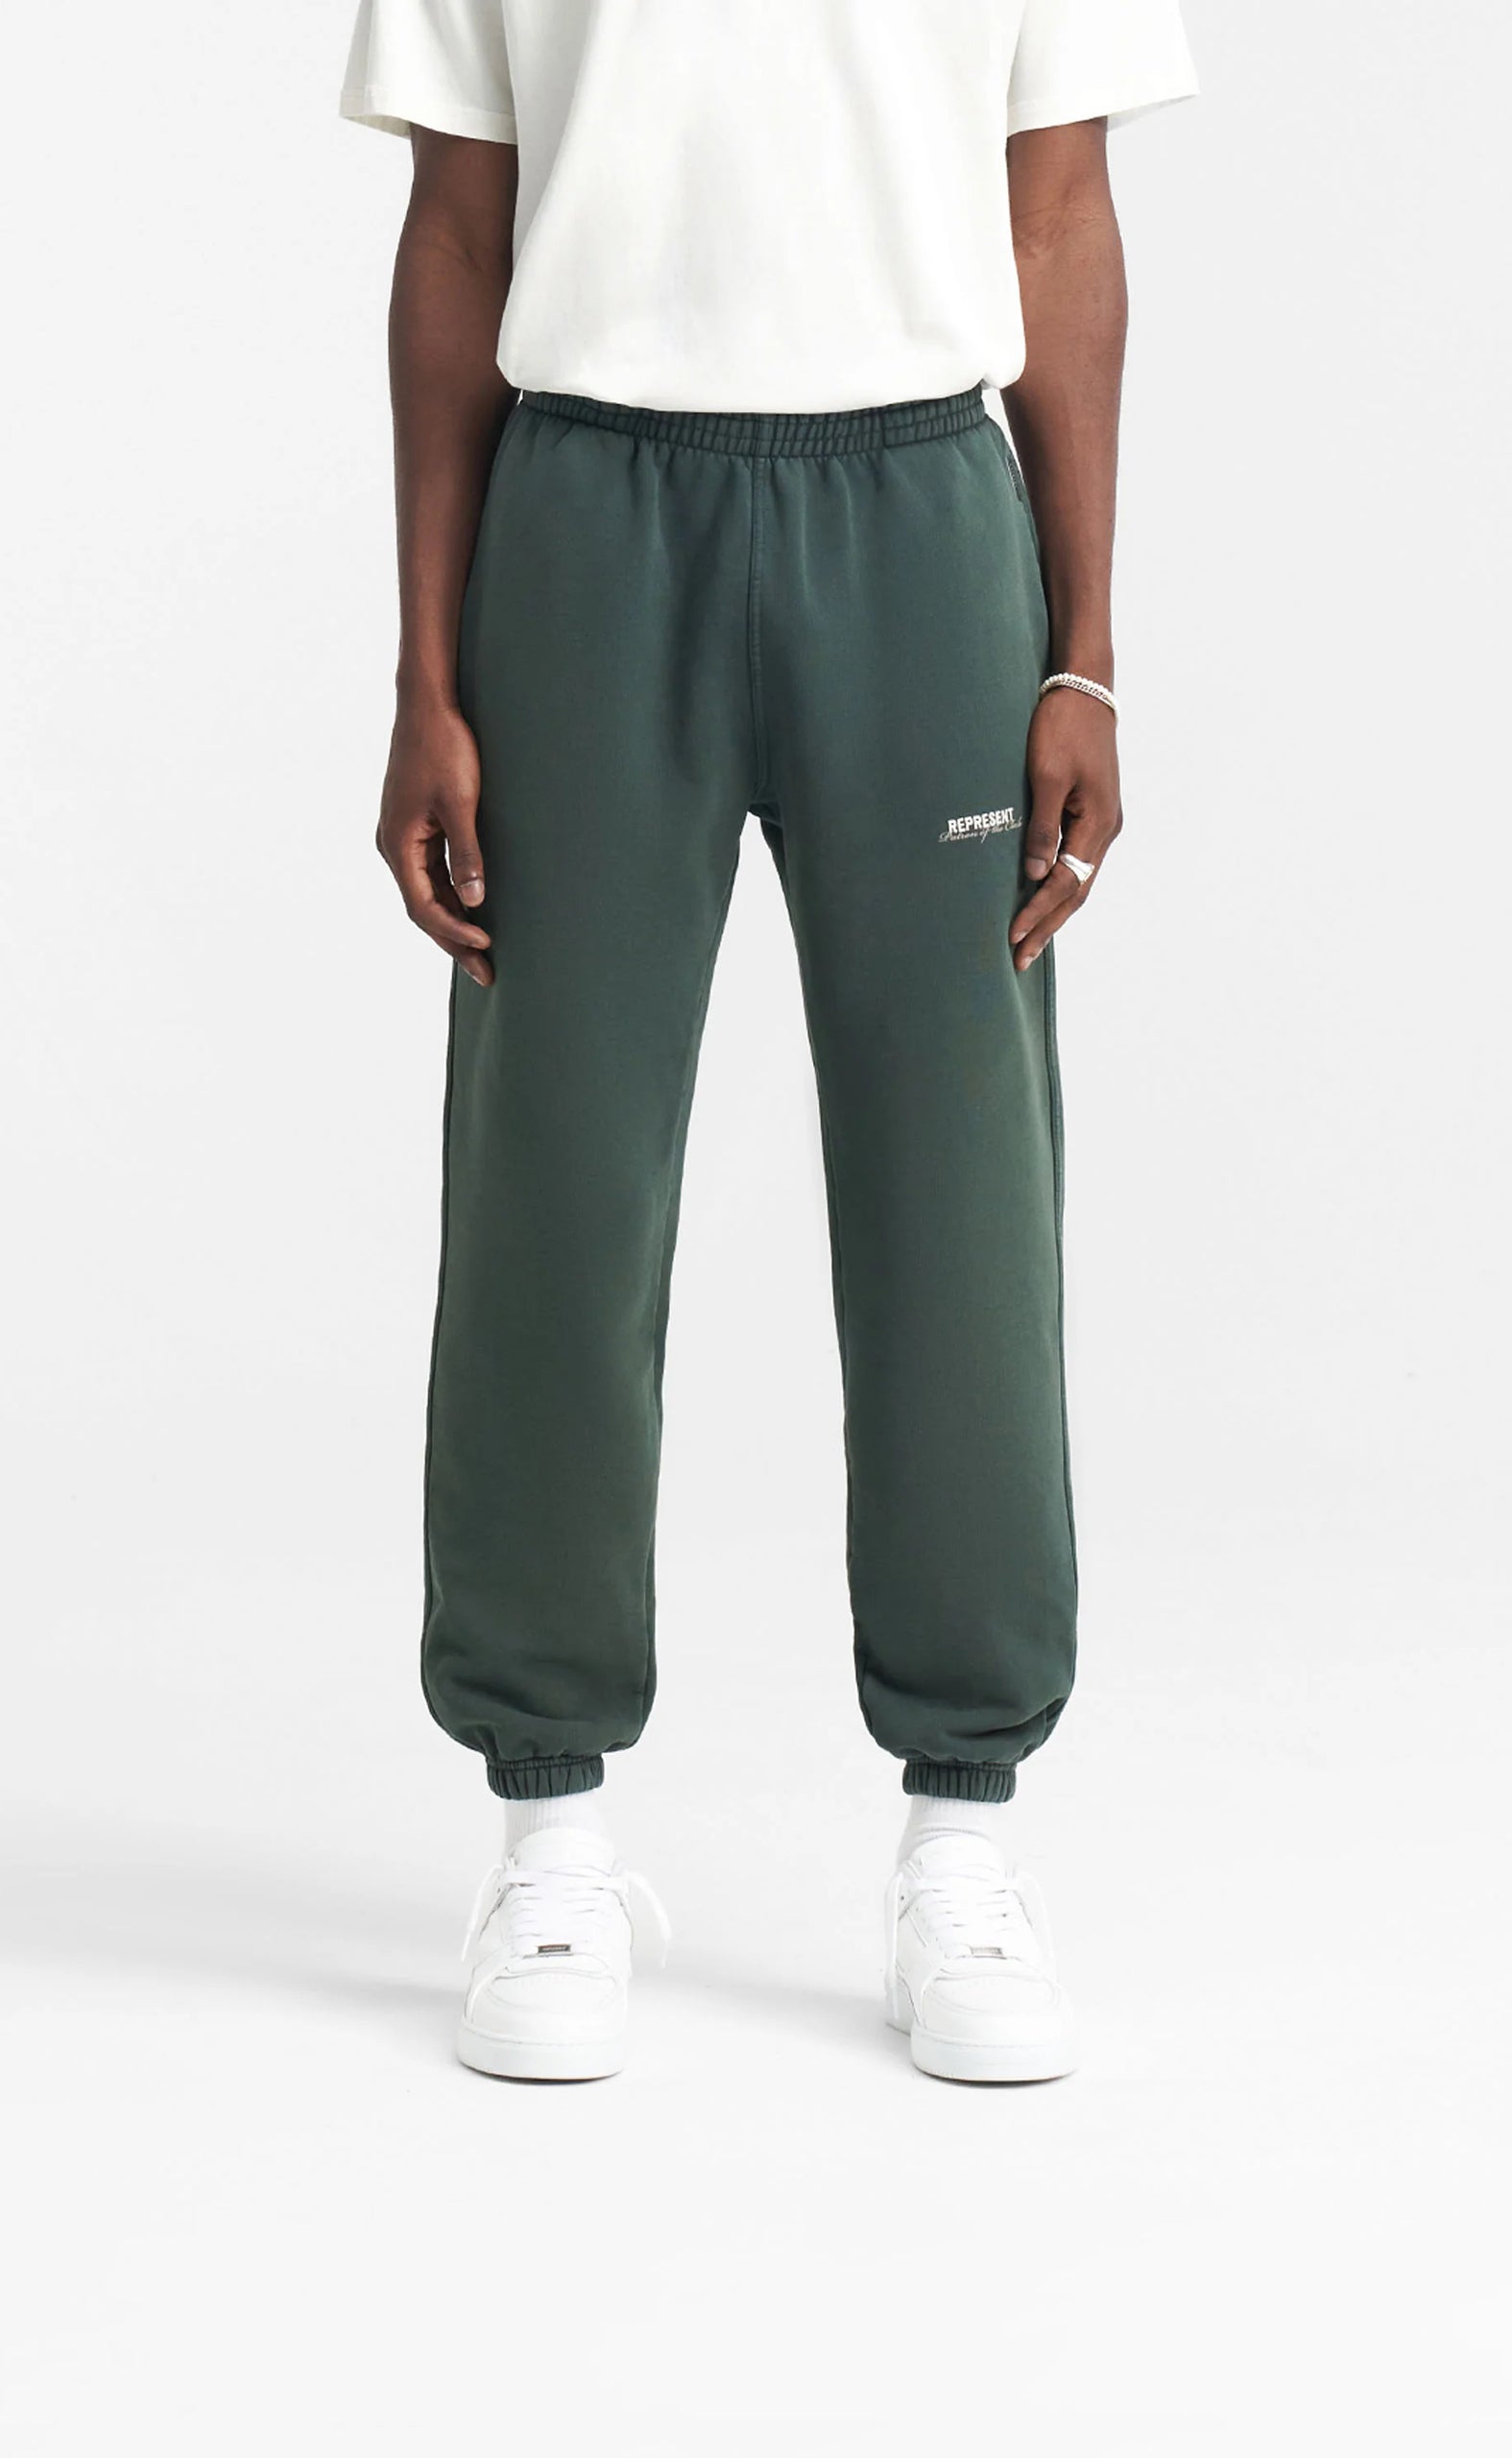 PATRON OF THE CLUB FOREST GREEN SWEATPANTS